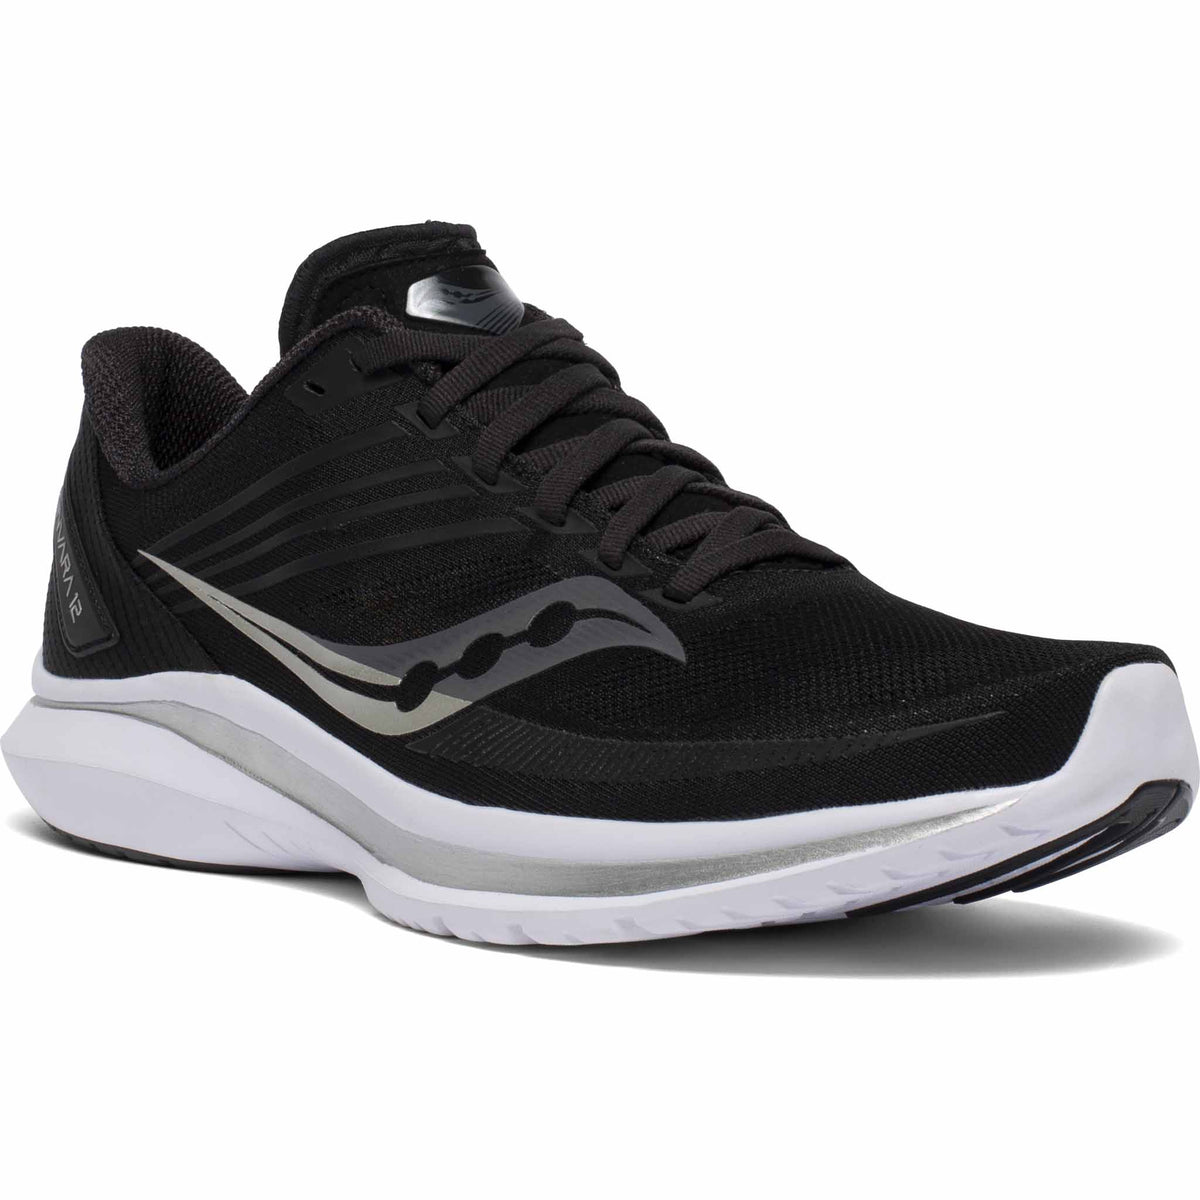 Saucony Kinvara 12 chaussures de course a pied homme Black / Silver angle